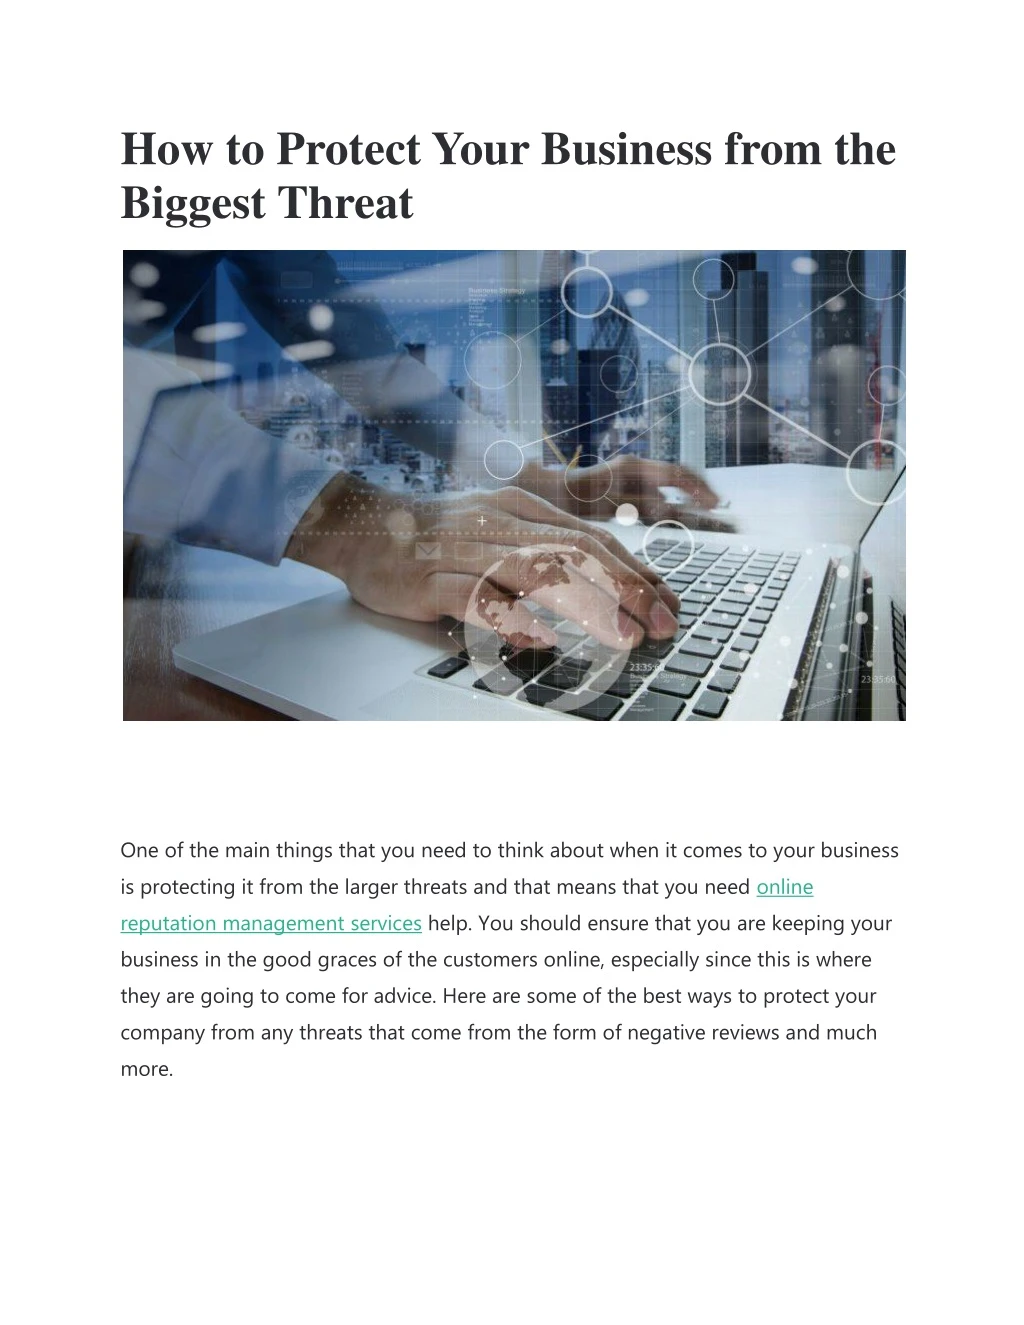 how to protect your business from the biggest